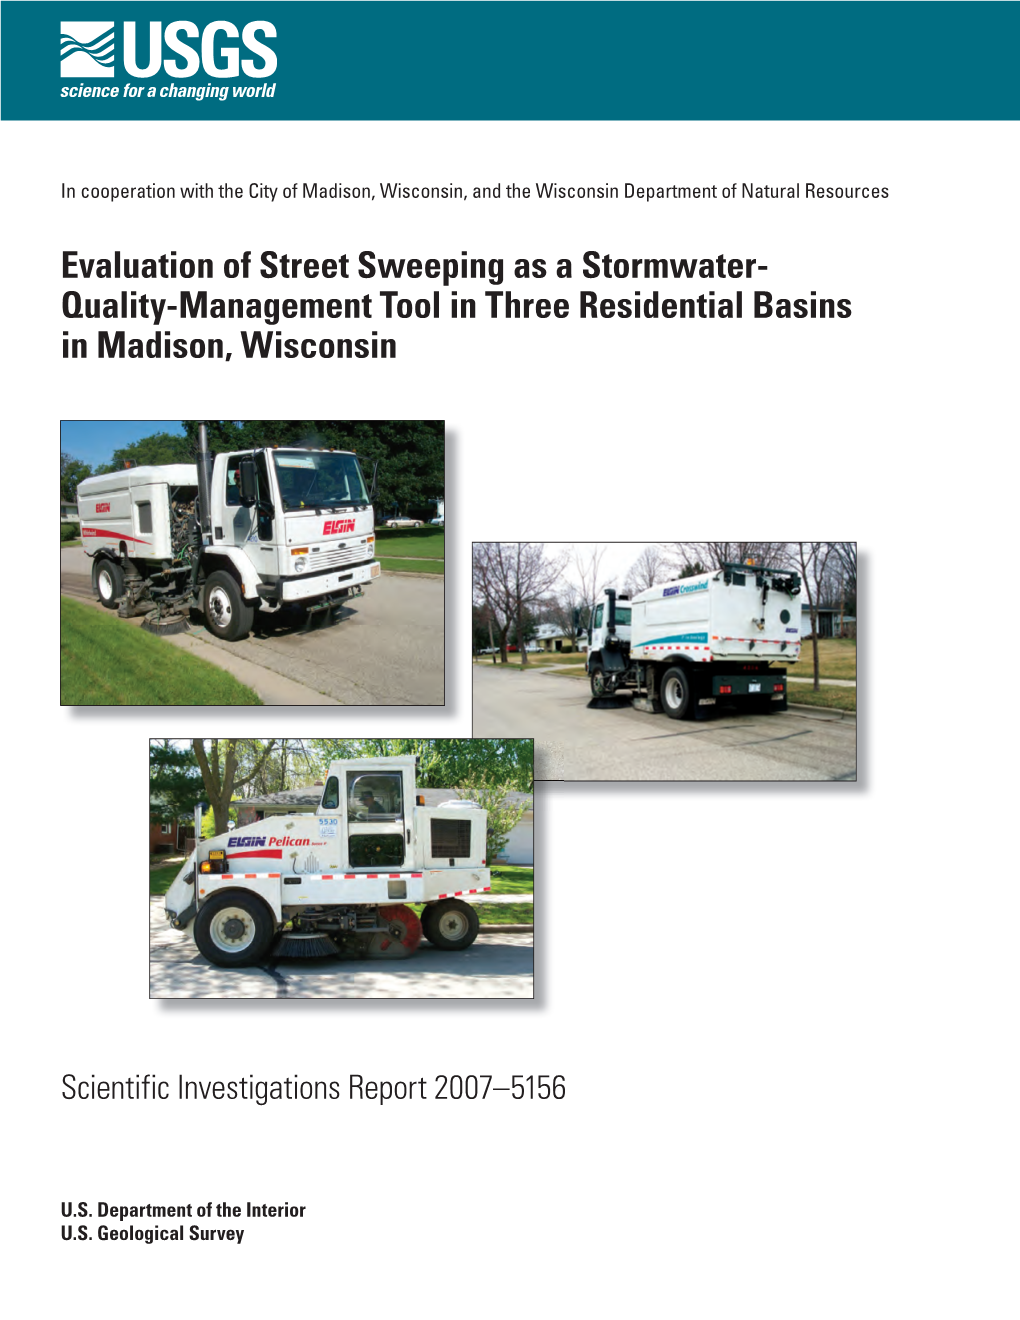 Evaluation of Street Sweeping As a Stormwater- Quality-Management Tool in Three Residential Basins in Madison, Wisconsin